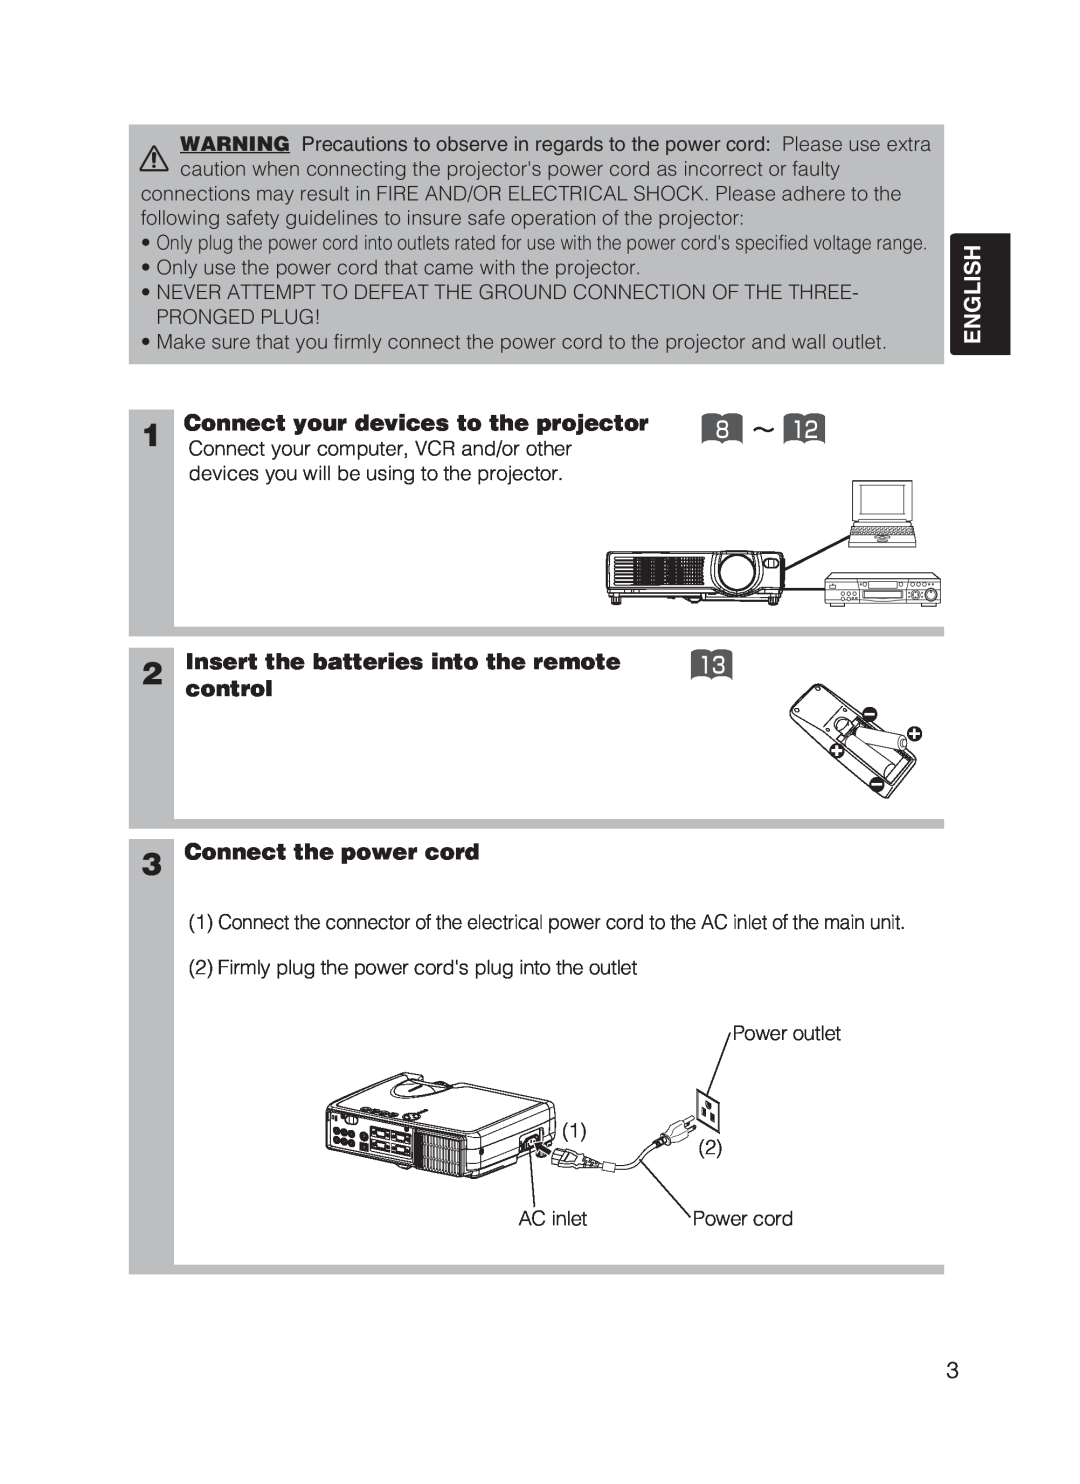 Dukane 8755B user manual English, Connect your devices to the projector, Insert the batteries into the remote, control 